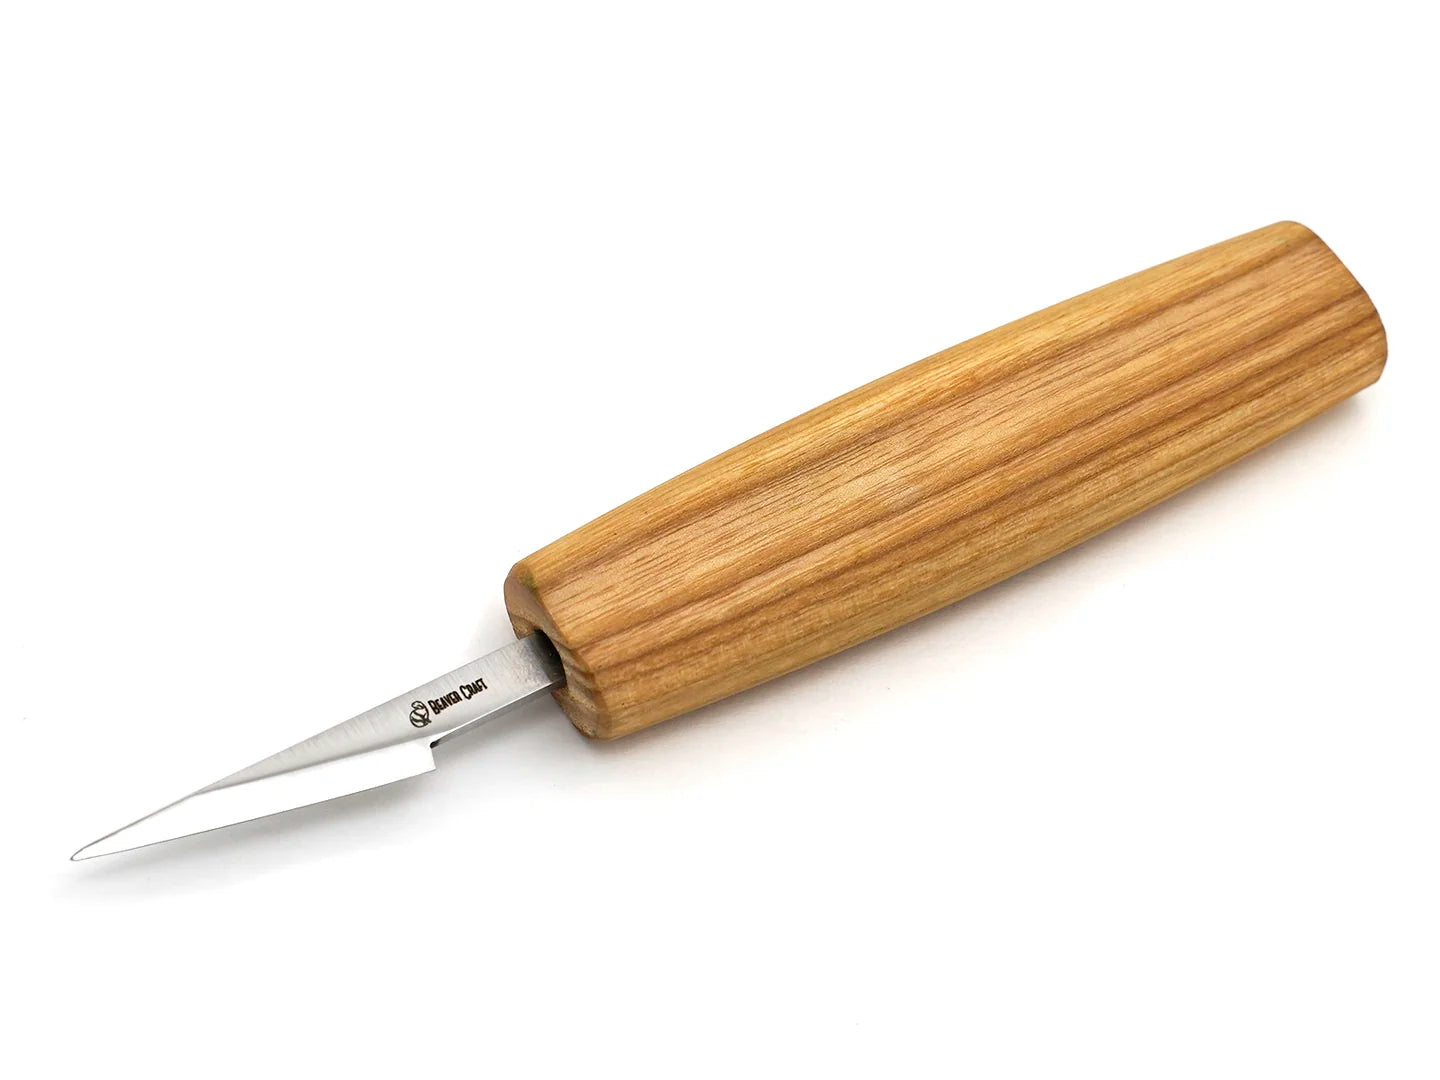 Carving Knives - The Best Wood Carving Knives